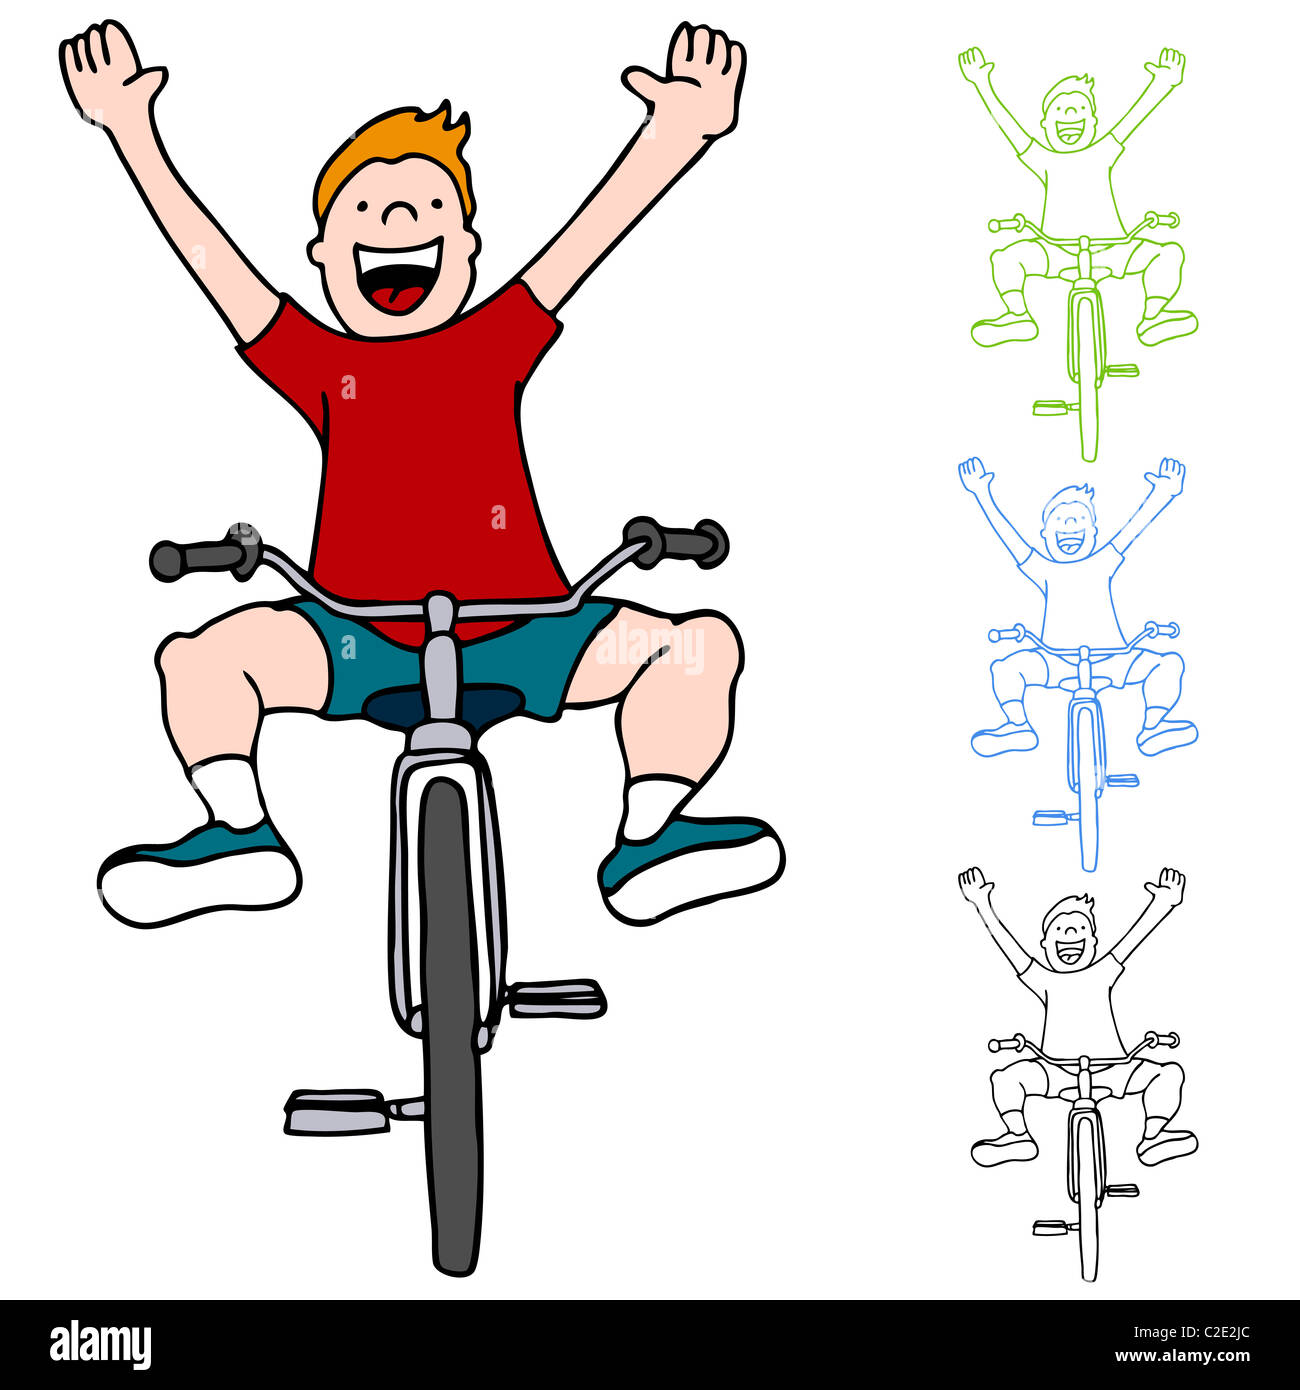 Cartoon image kid riding bicycle hi-res stock photography and images - Alamy